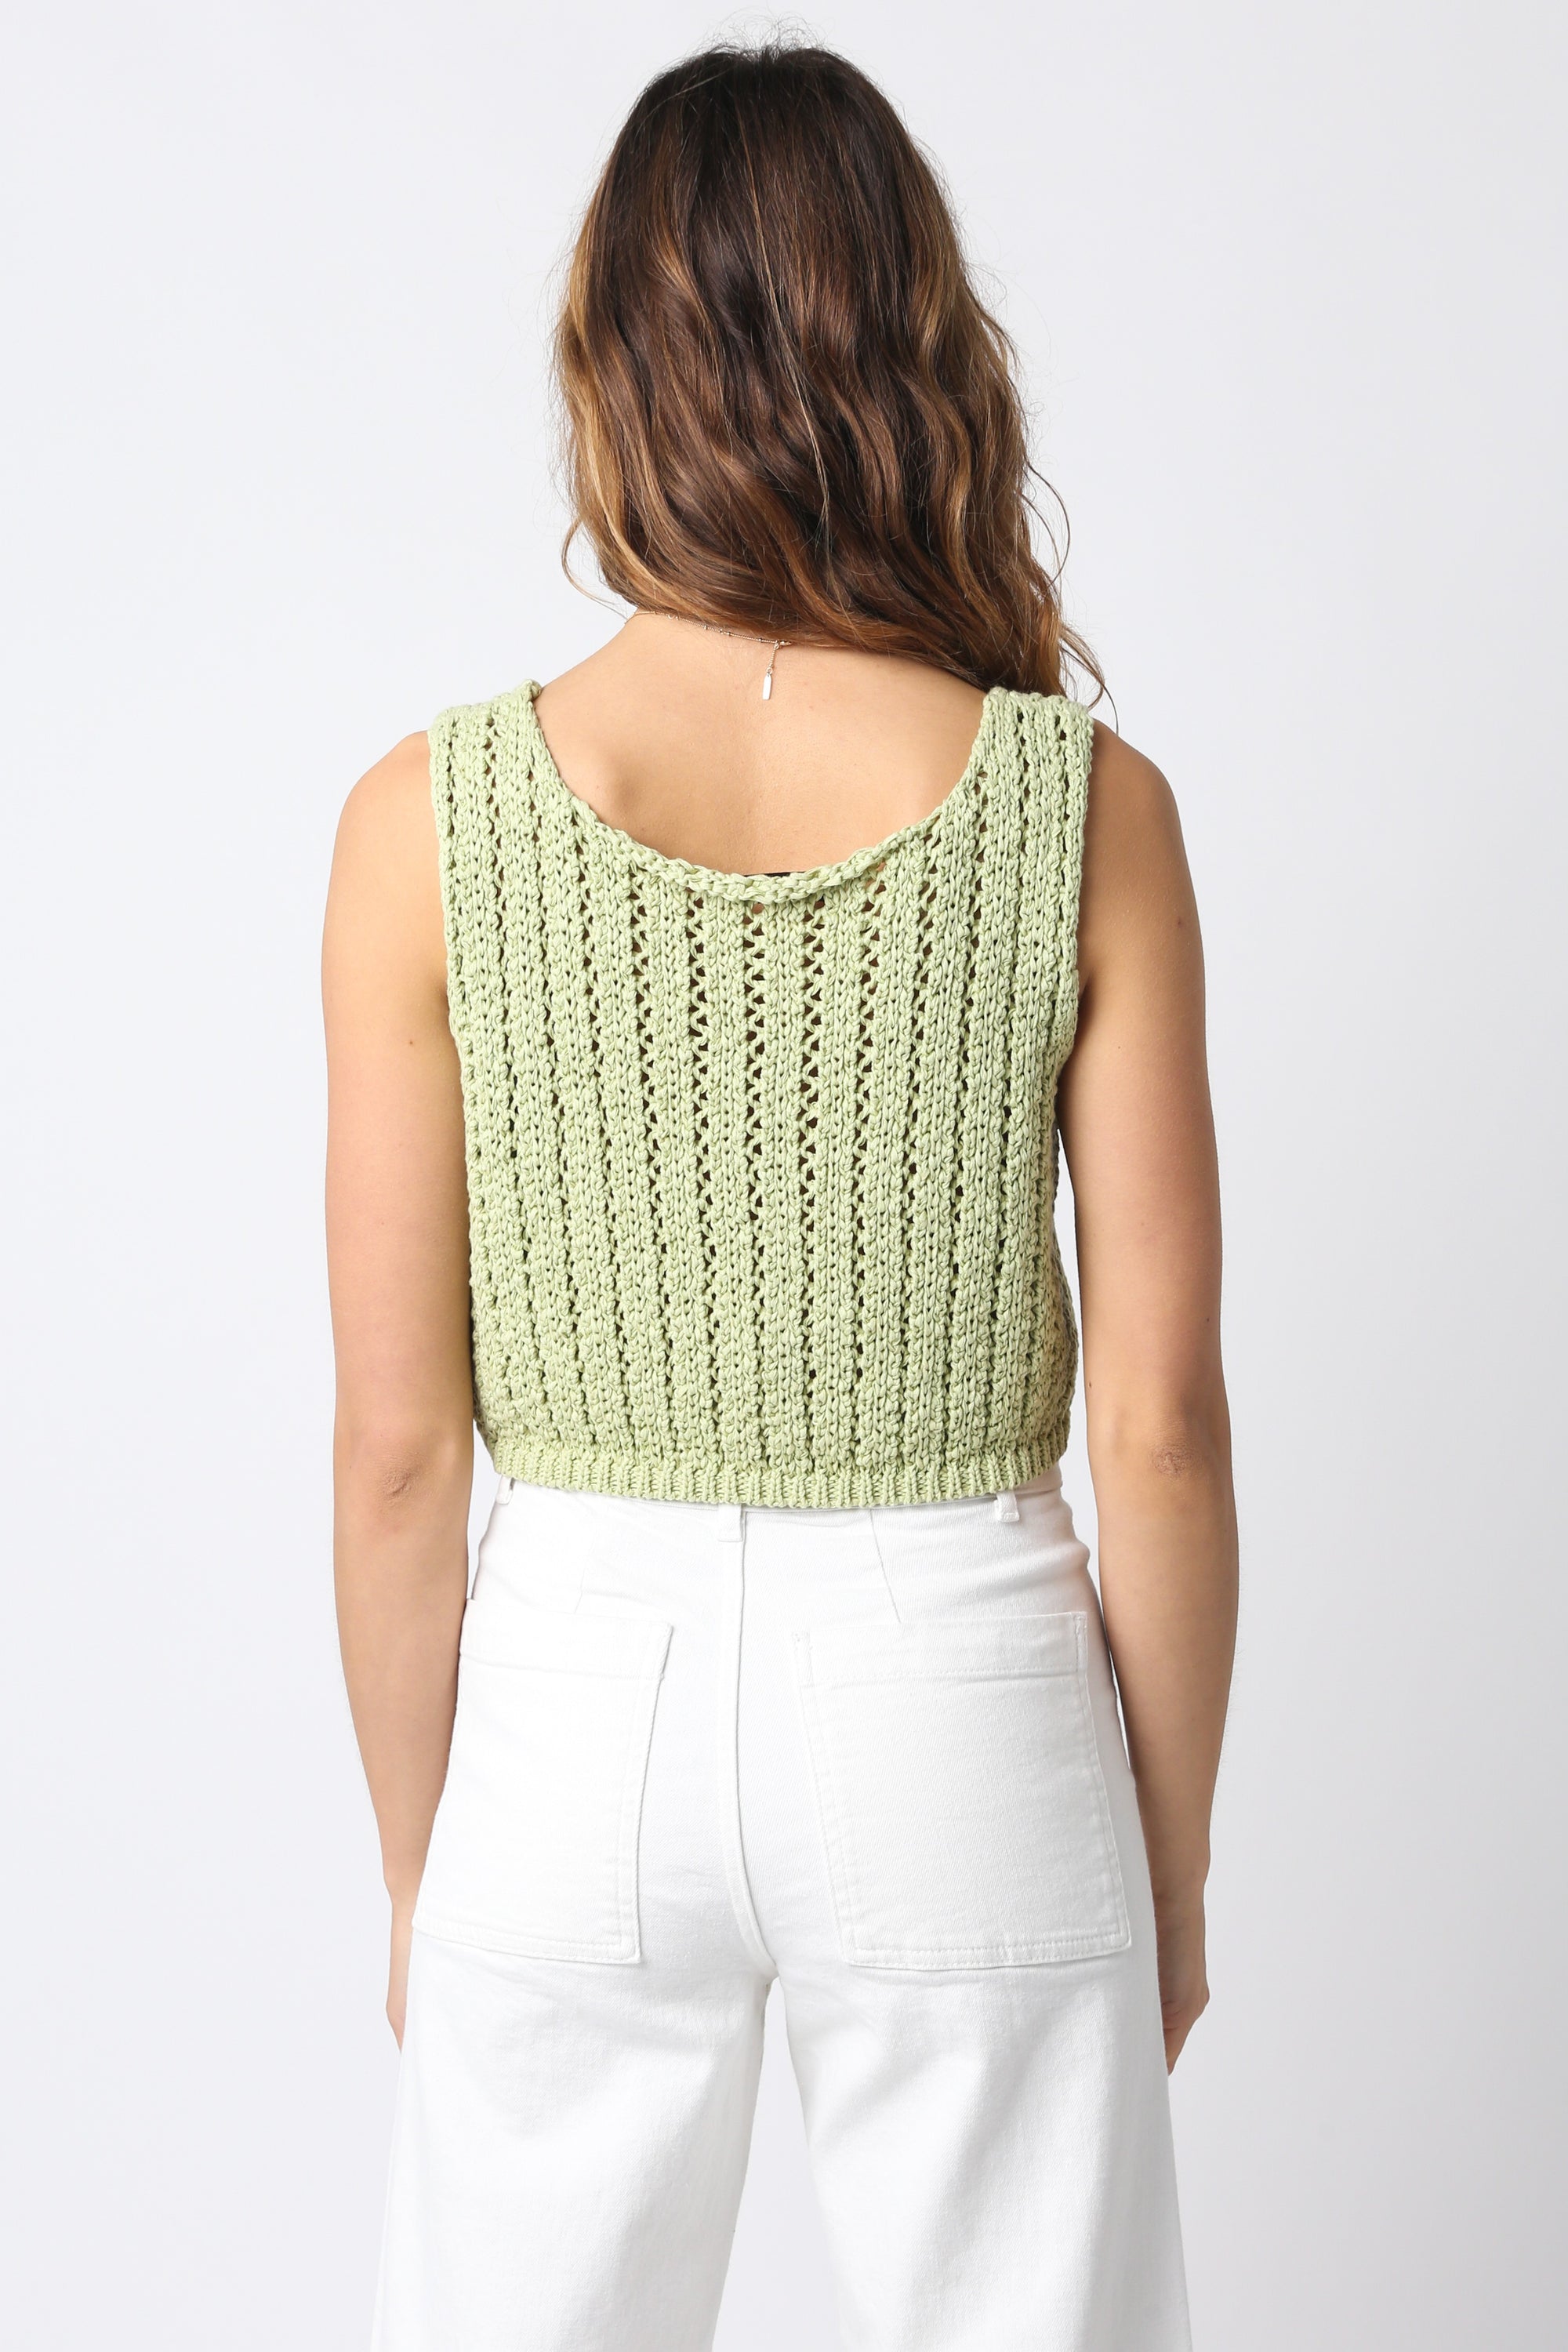 Olivaceous | Green Knit Cropped Button Front Top | Sweetest Stitch